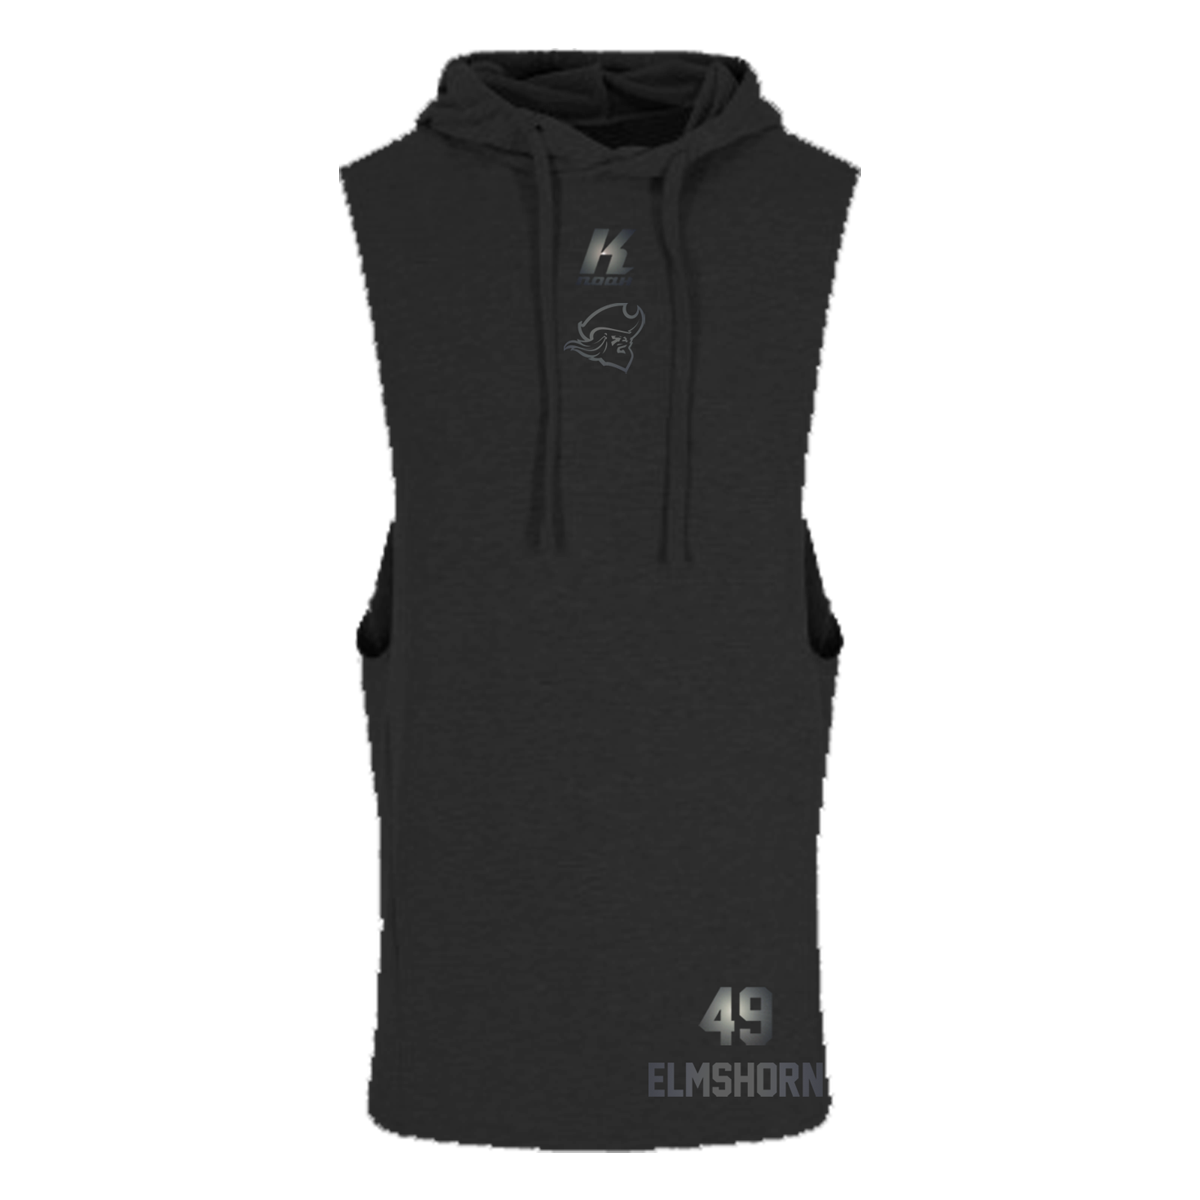 Fighting Pirates "Blackline" Sleeveless Muscle Hoodie JC053 with Playernumber or Initials